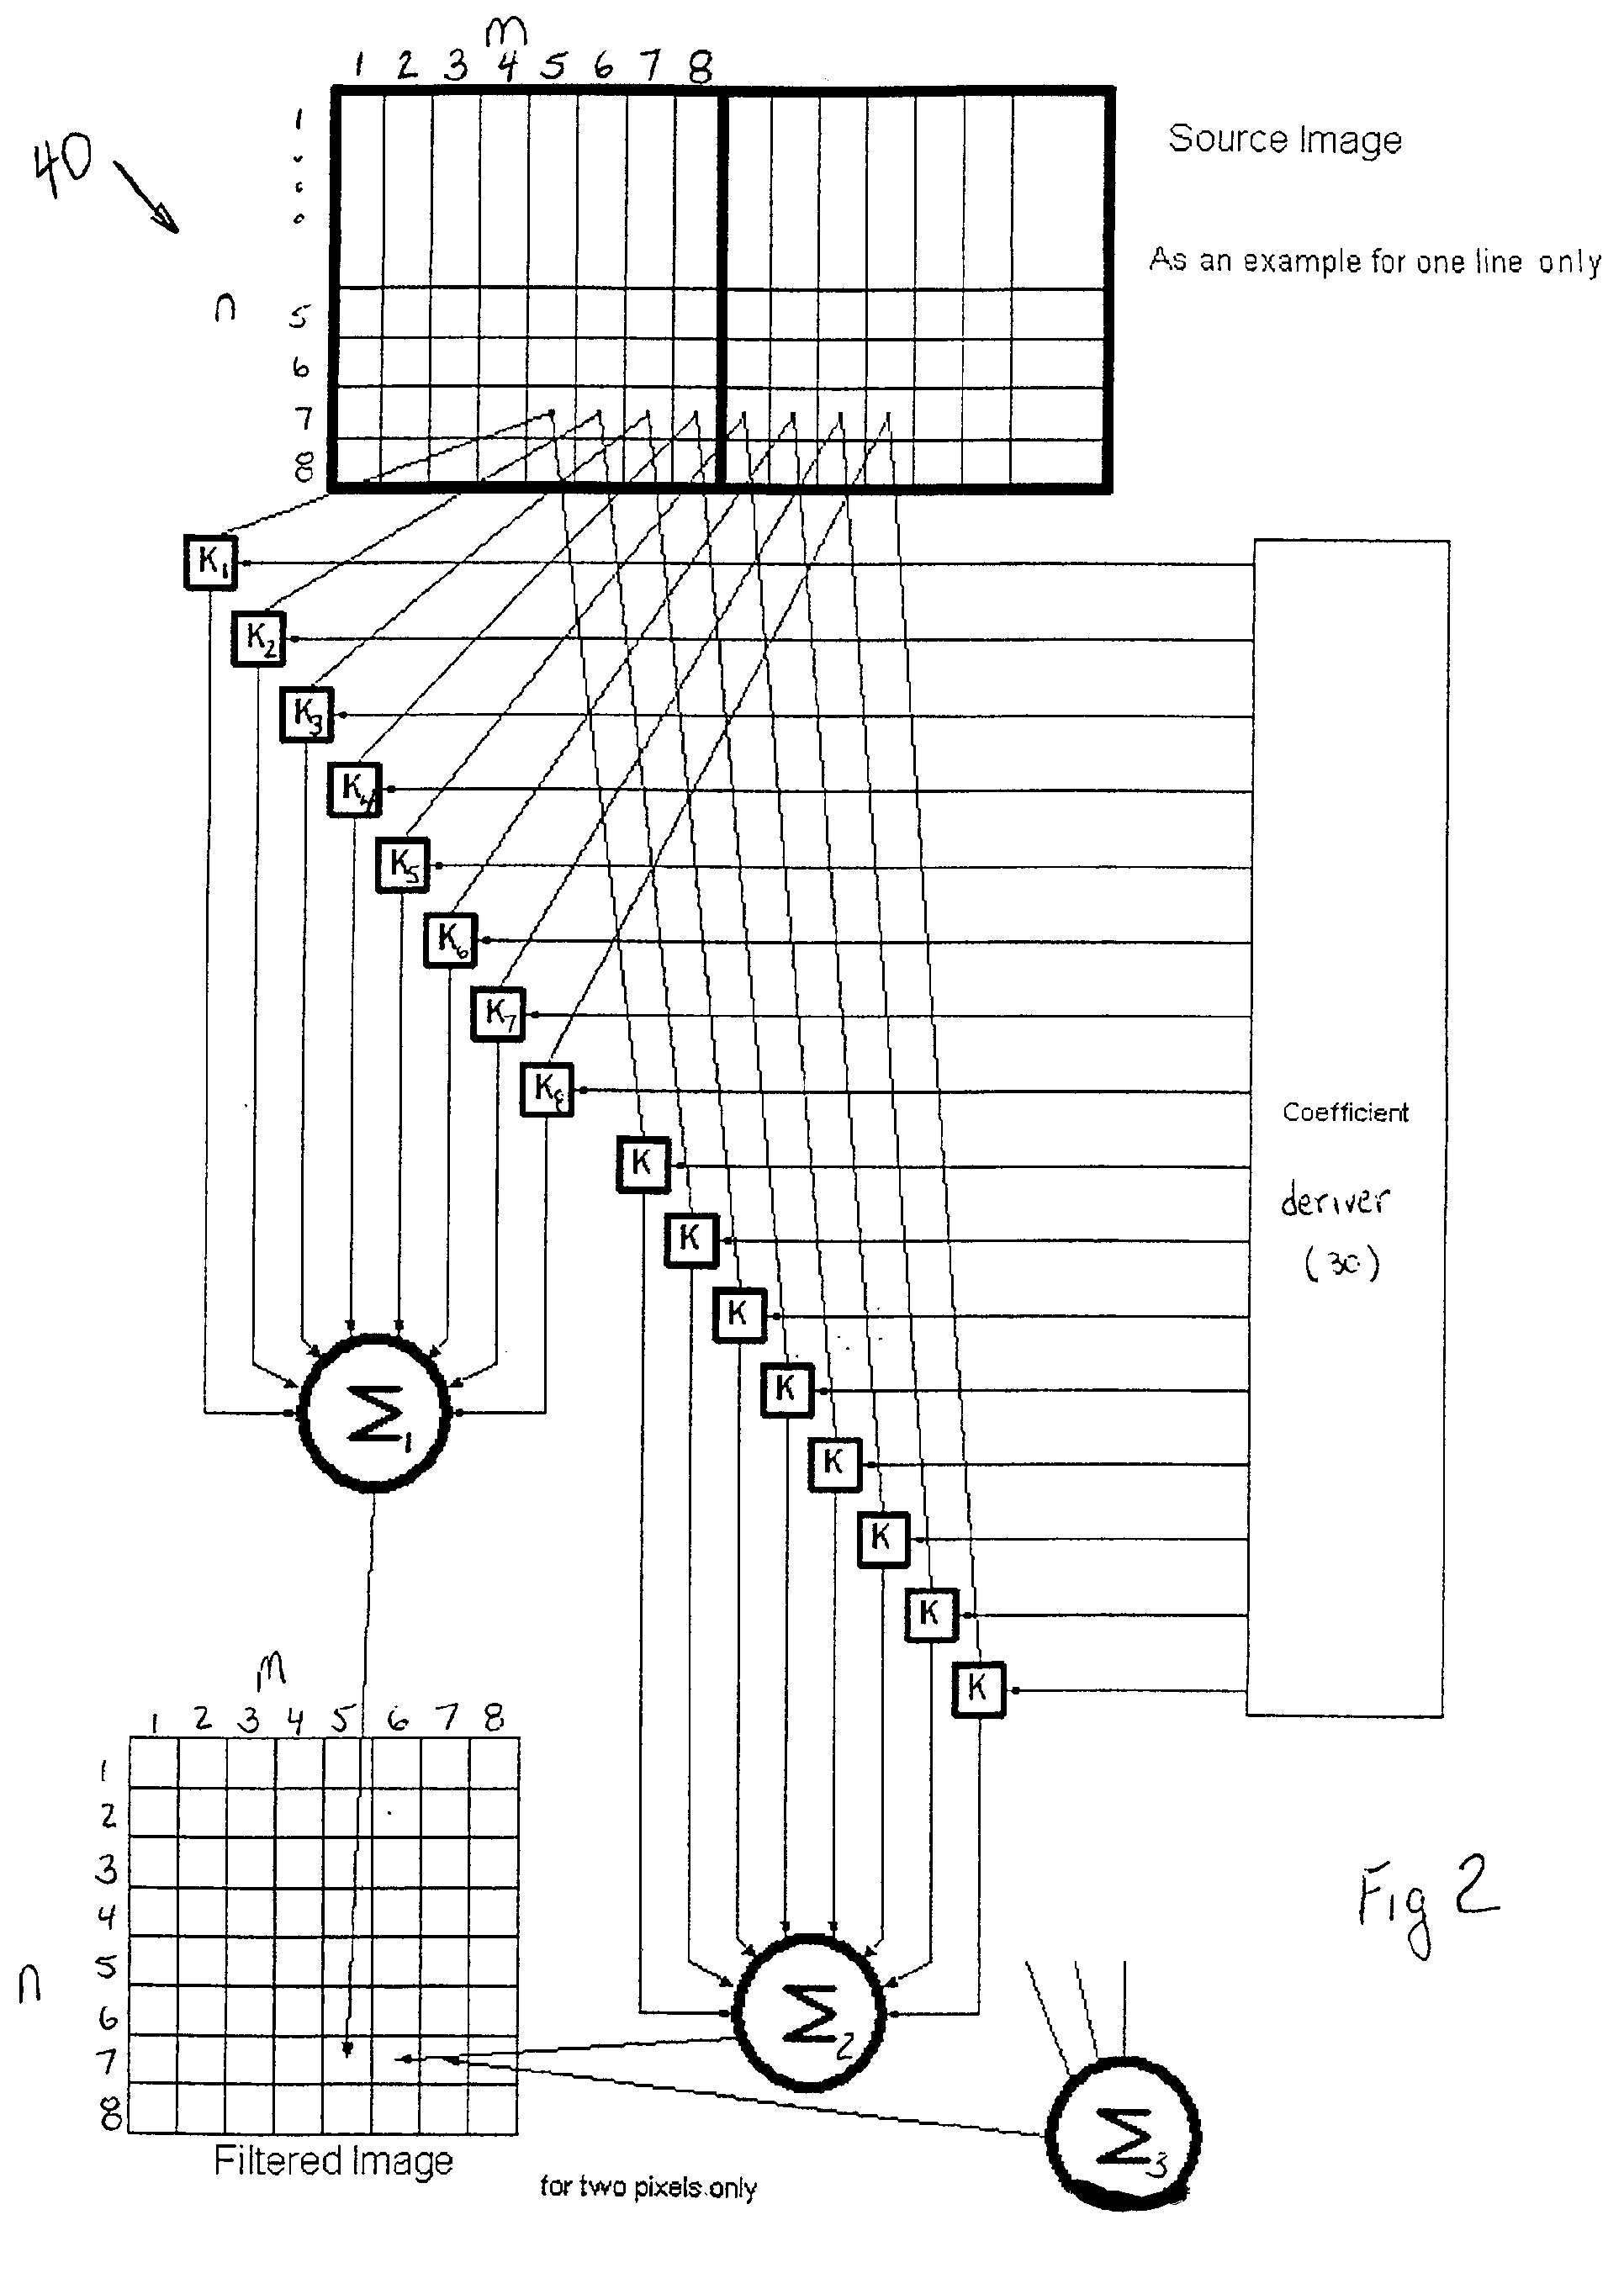 Method and apparatus for reducing the "blocky picture" effect in MPEG decoded images